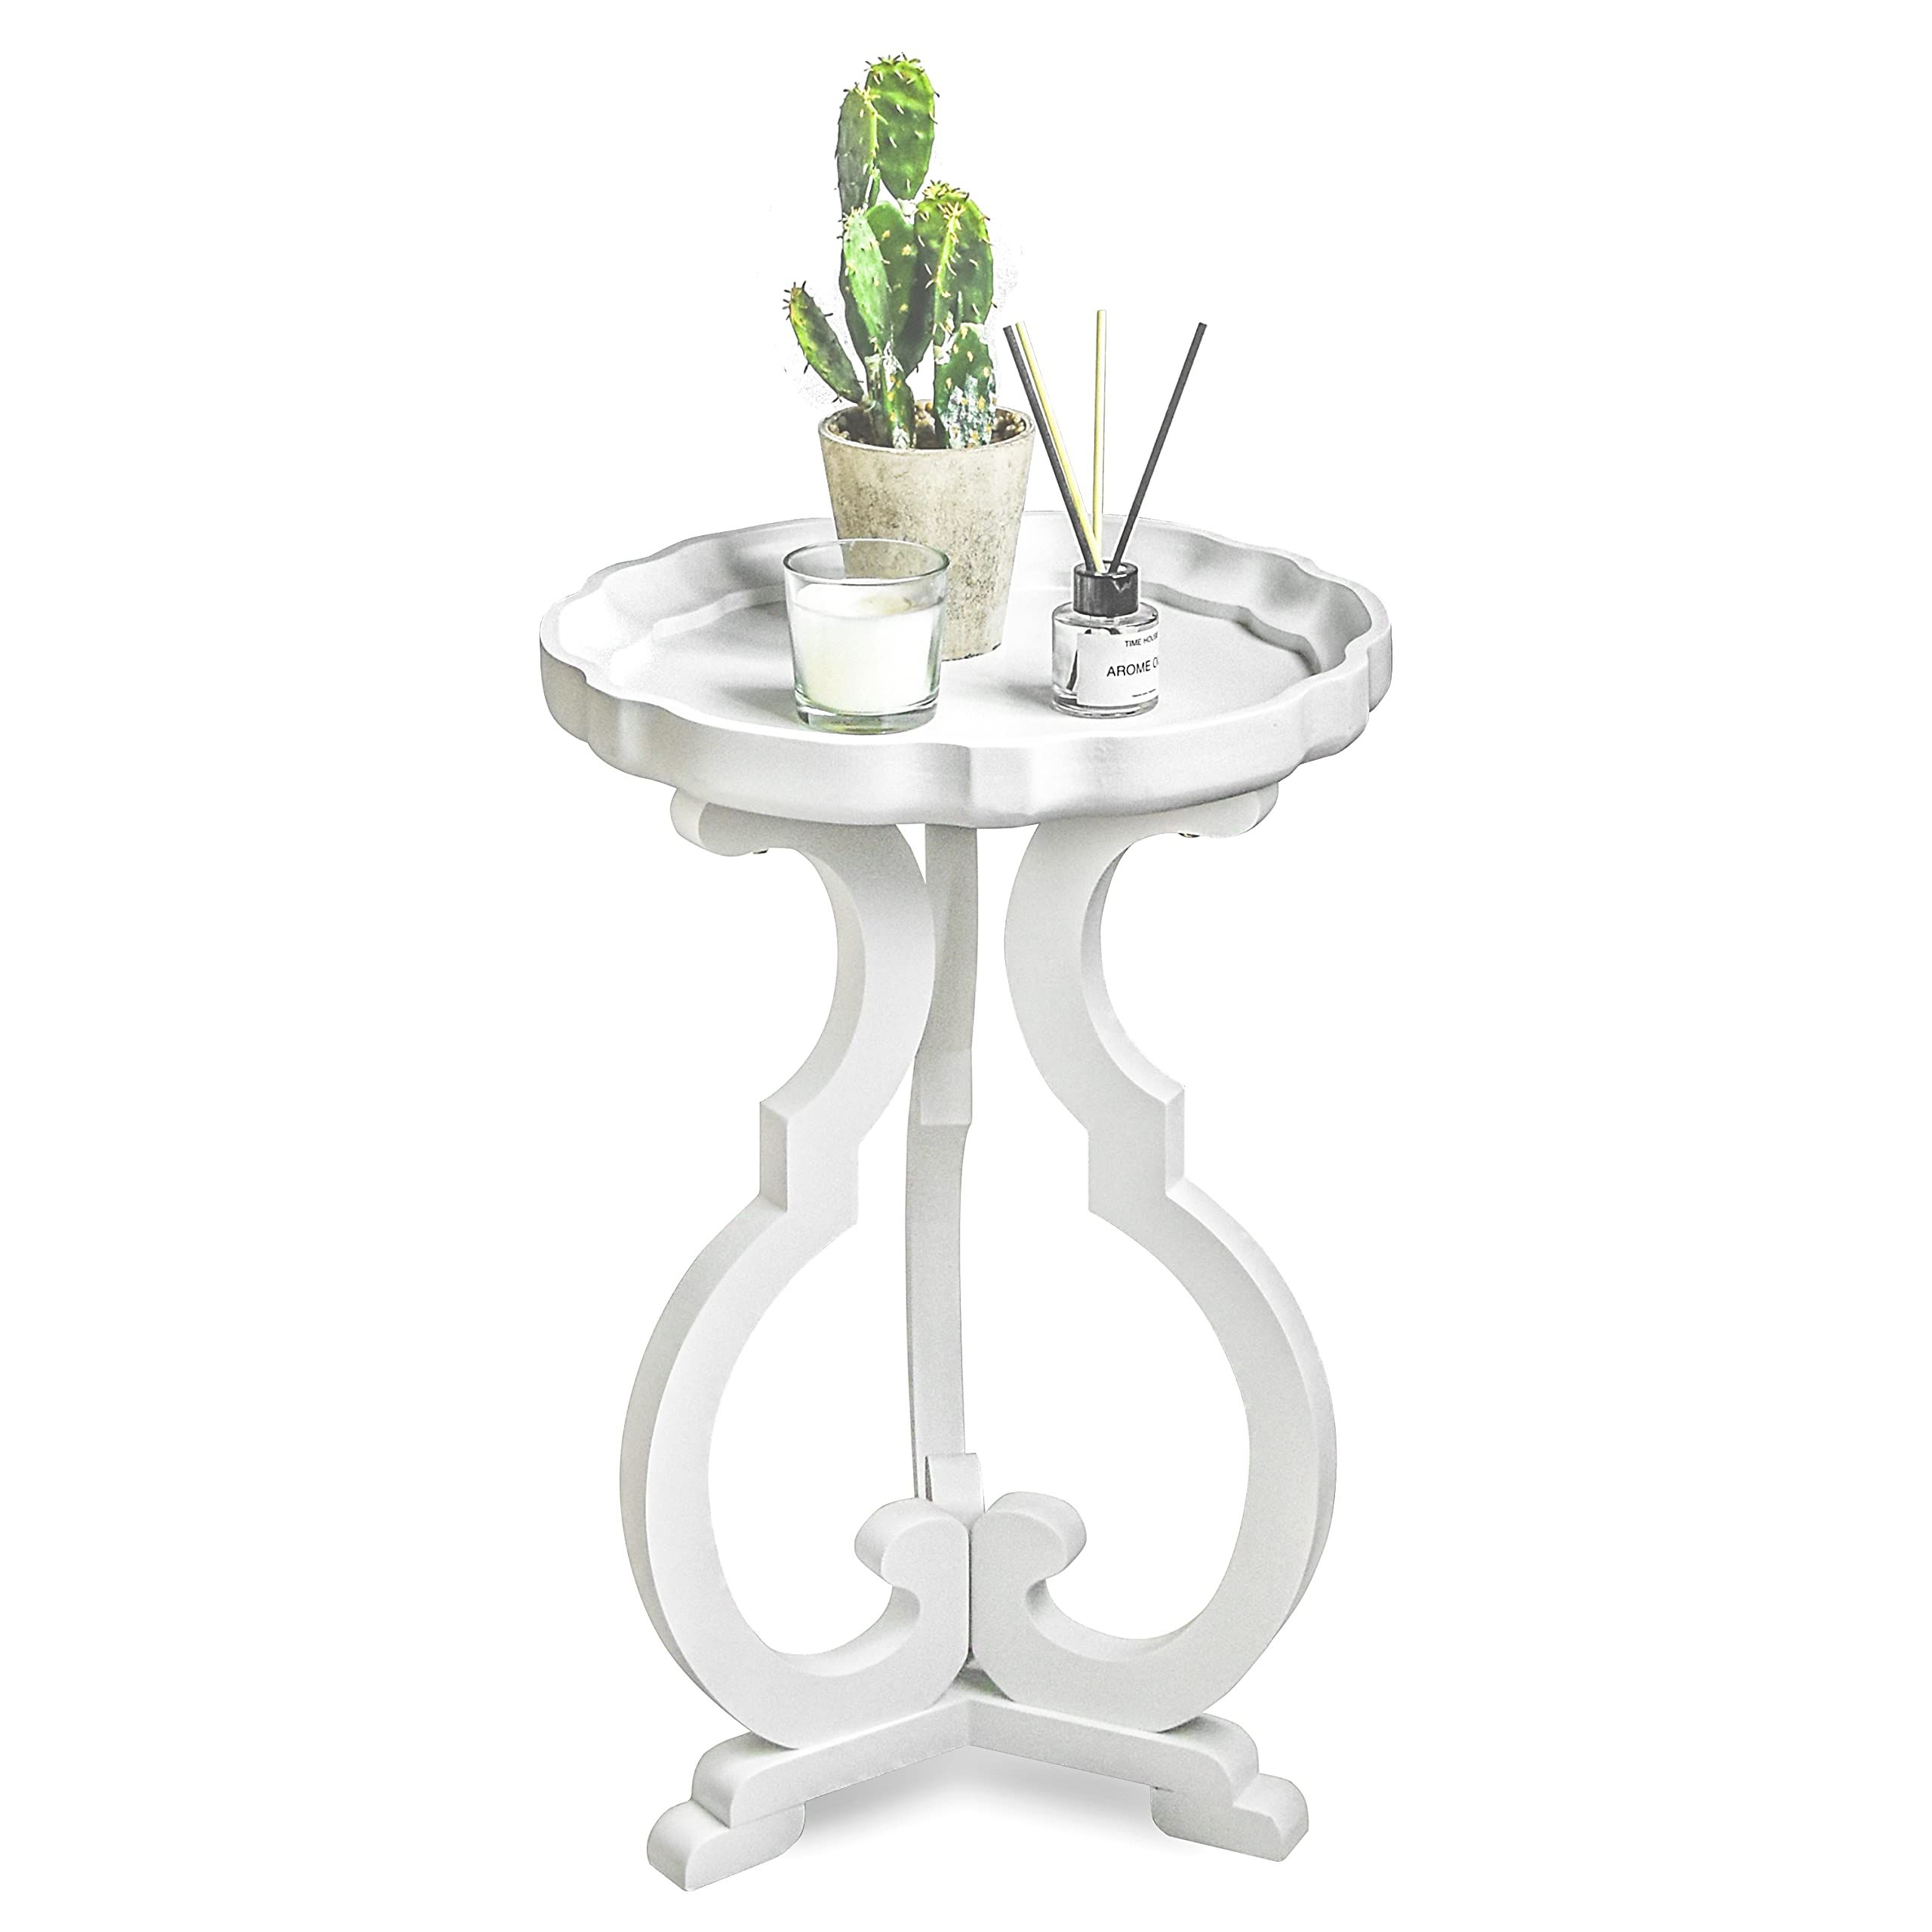 Senjie Side Tables,Accent Wood End Table with Exquisite Base,Round White Table for Bedroom,Living Ro | Amazon (US)